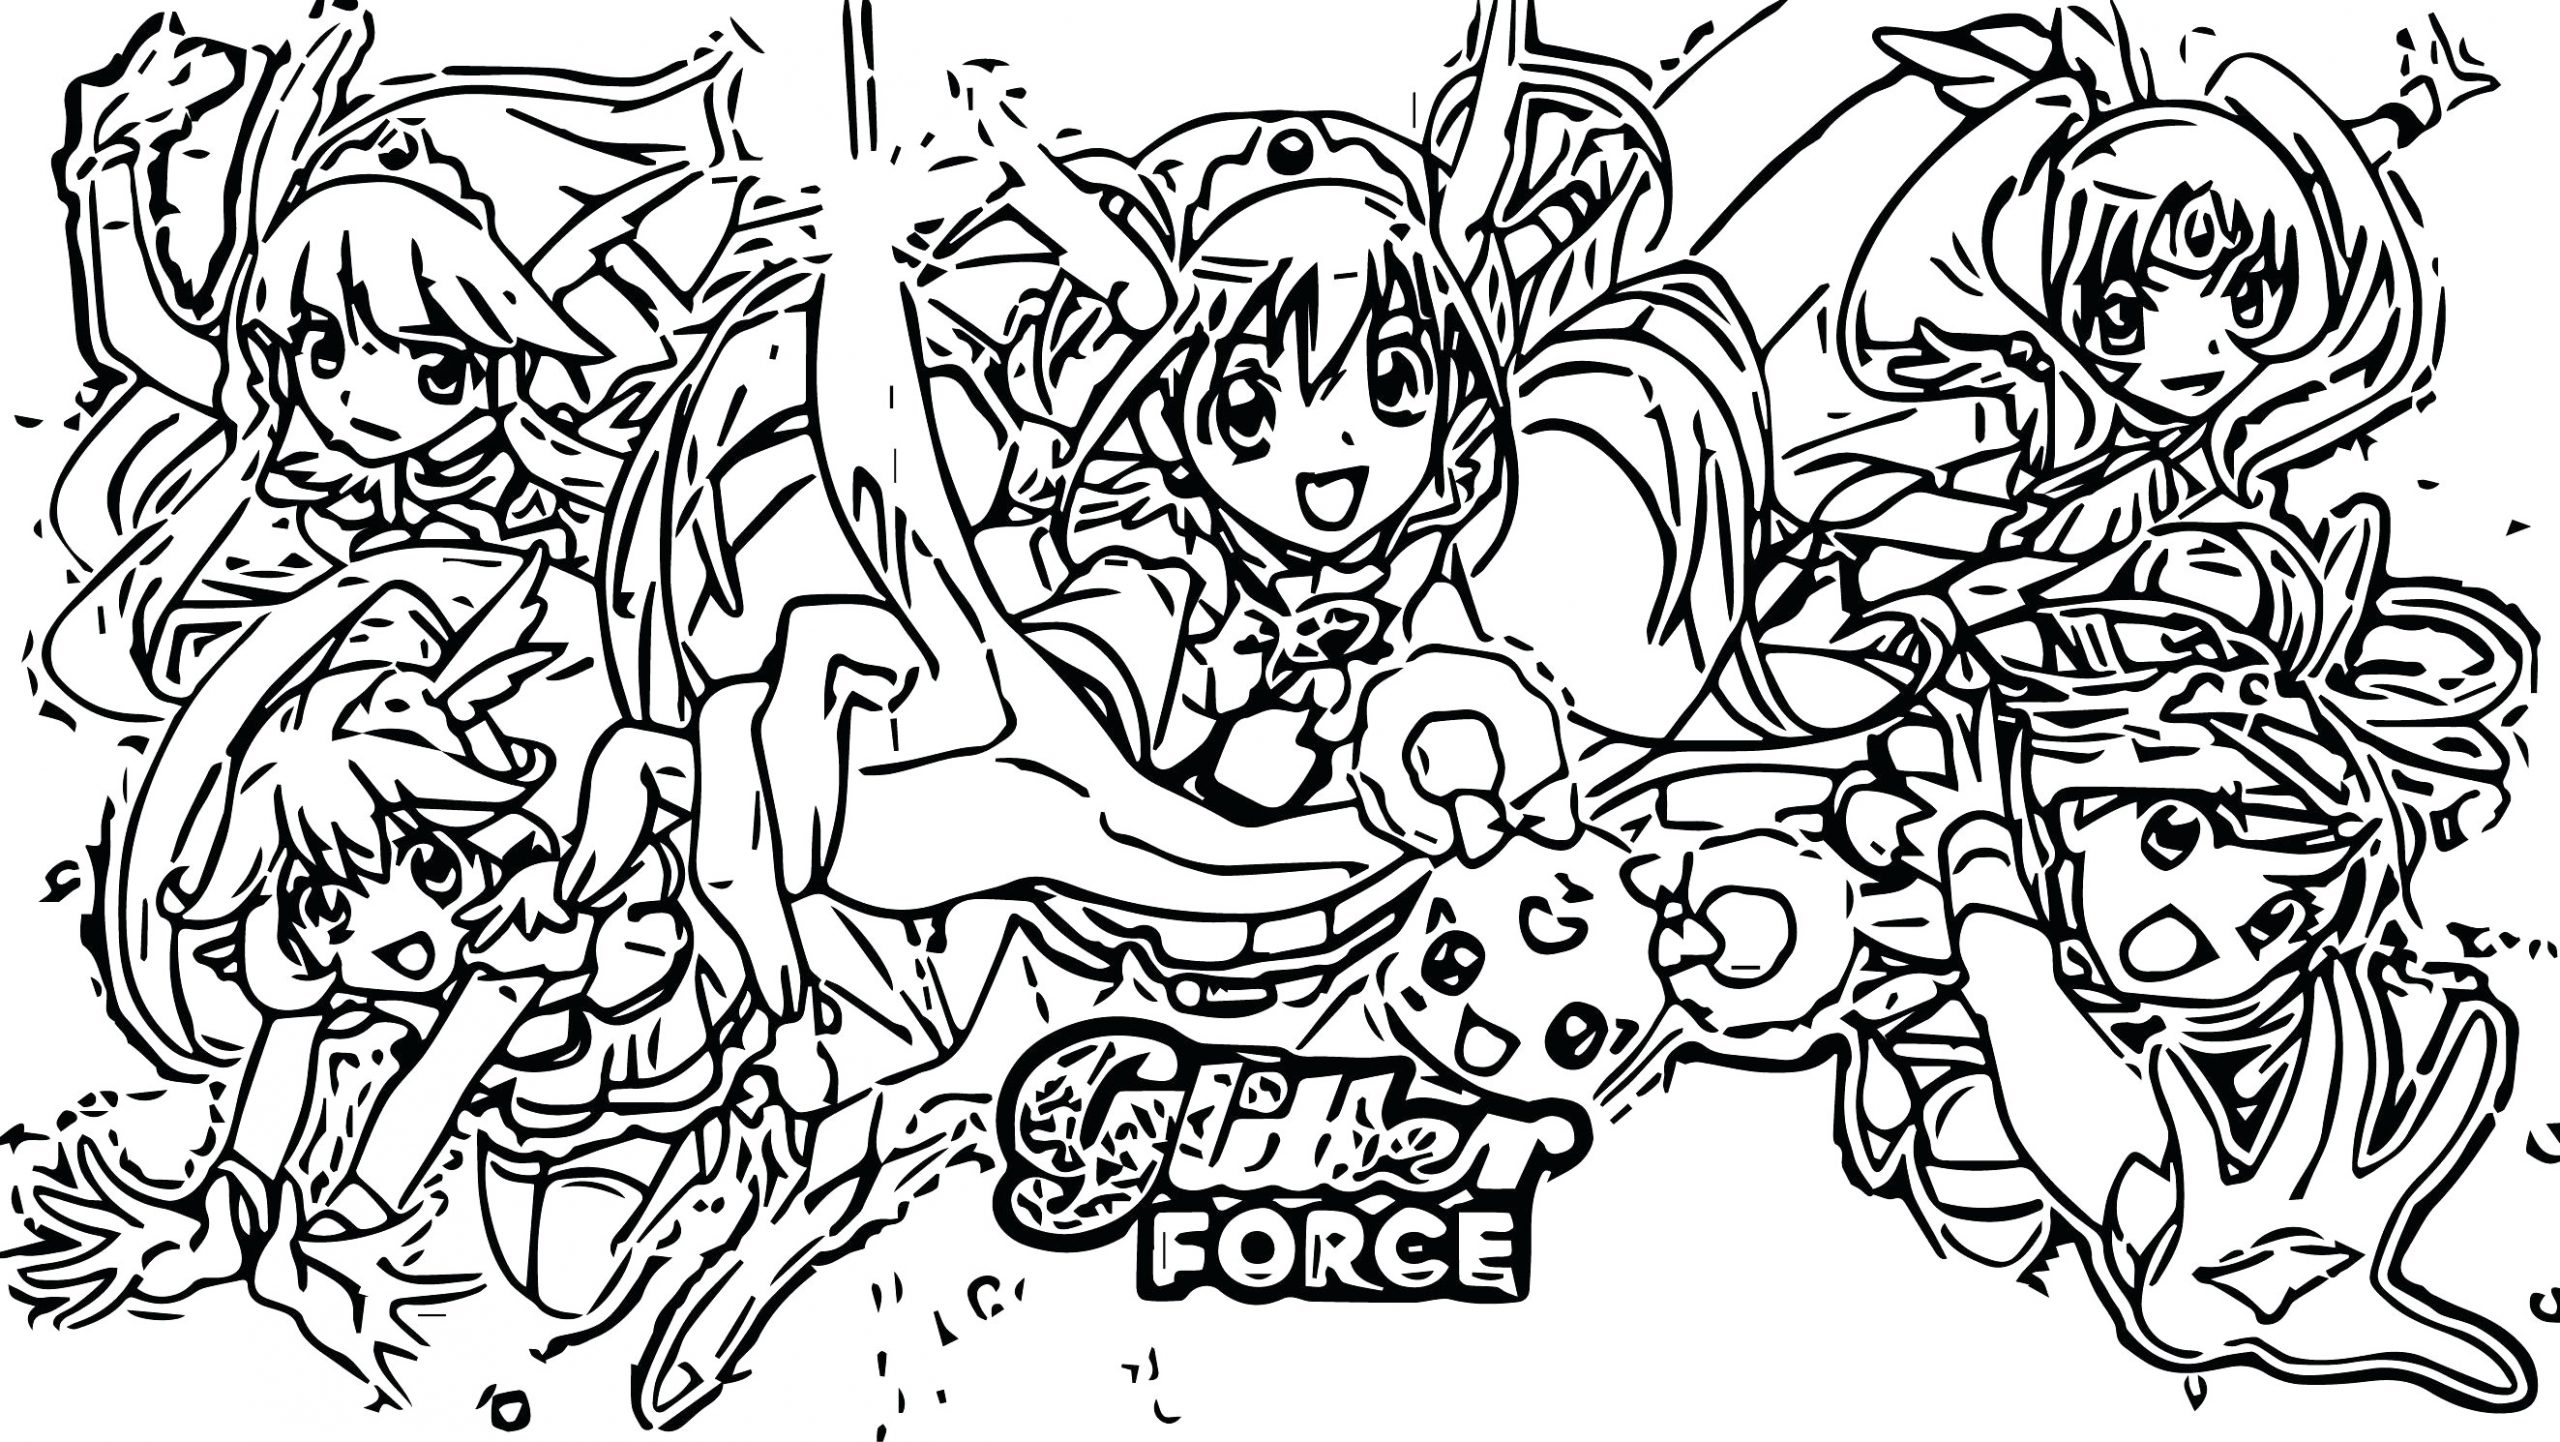 glitter-force-coloring-pages